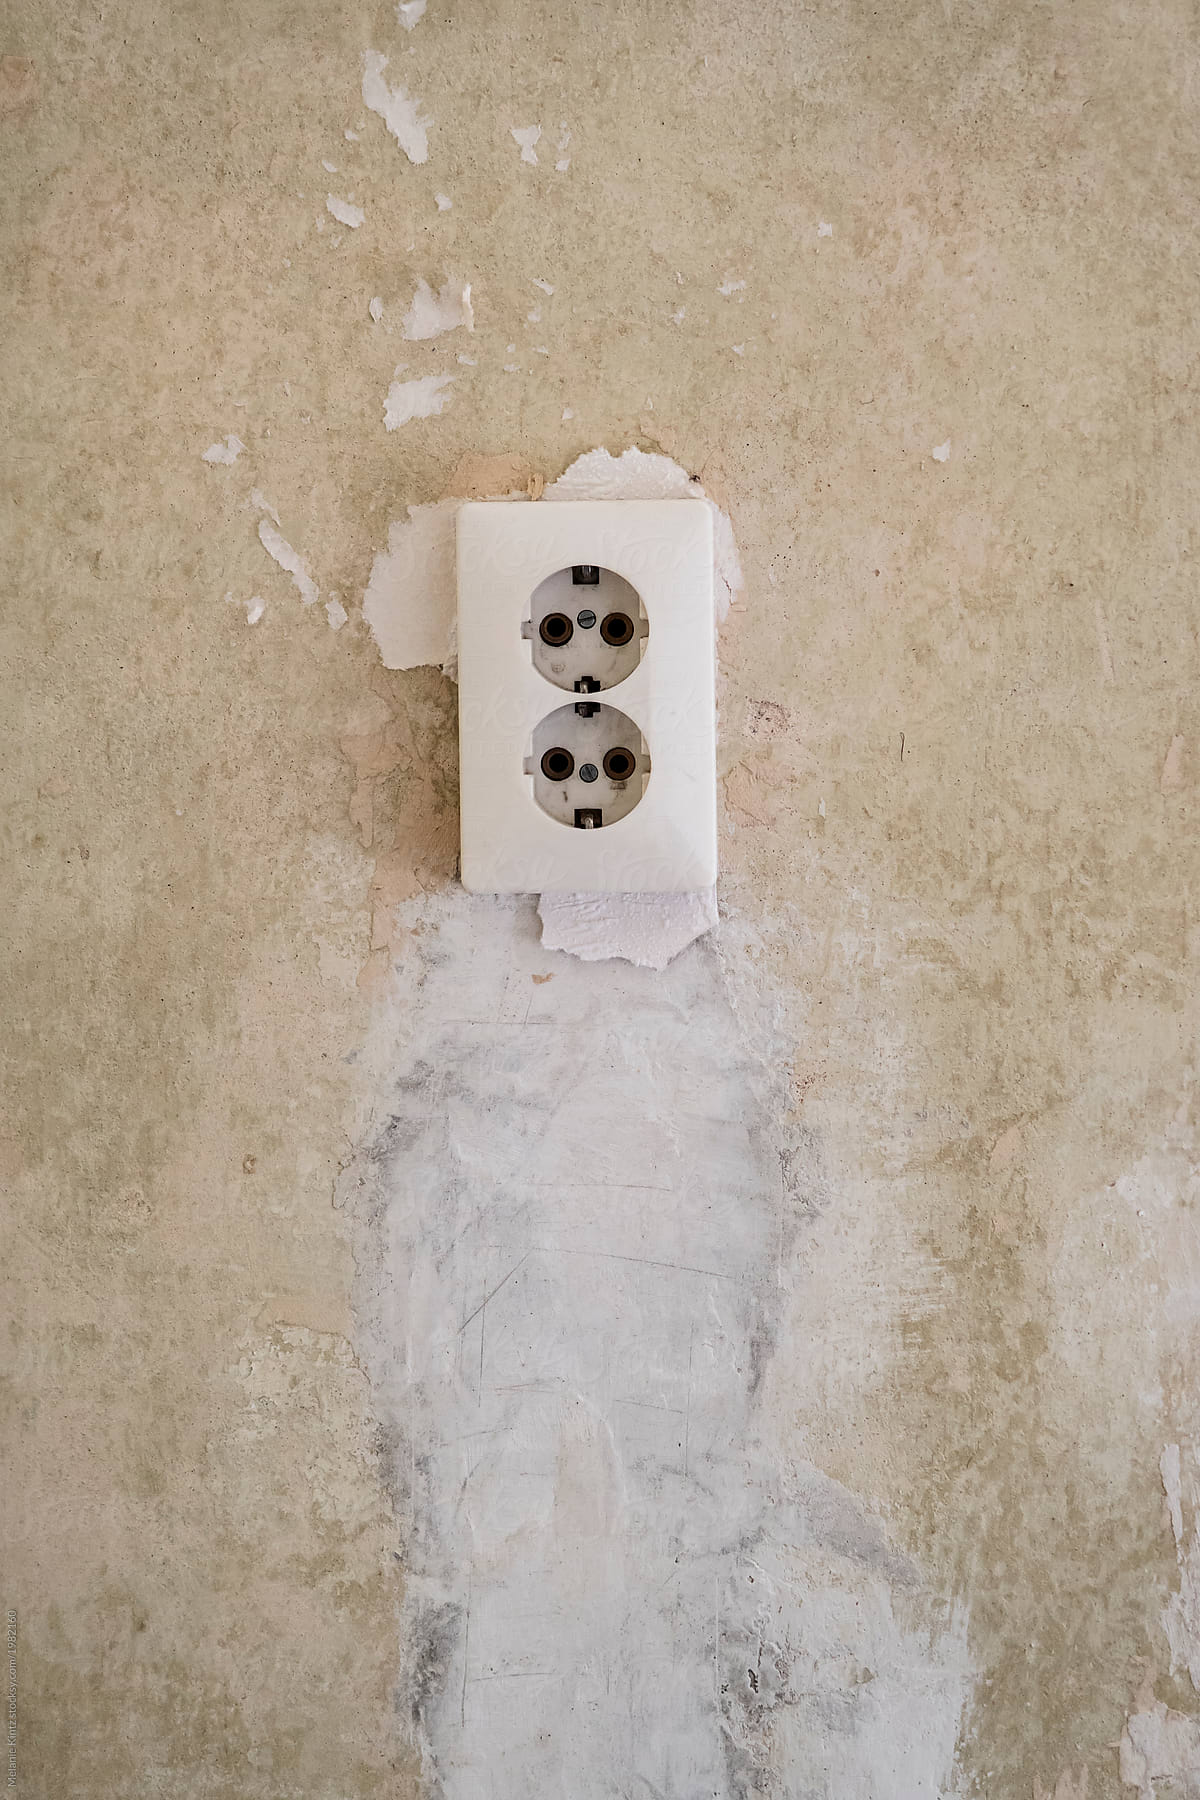 Old-fashioned outlet on a bare wall